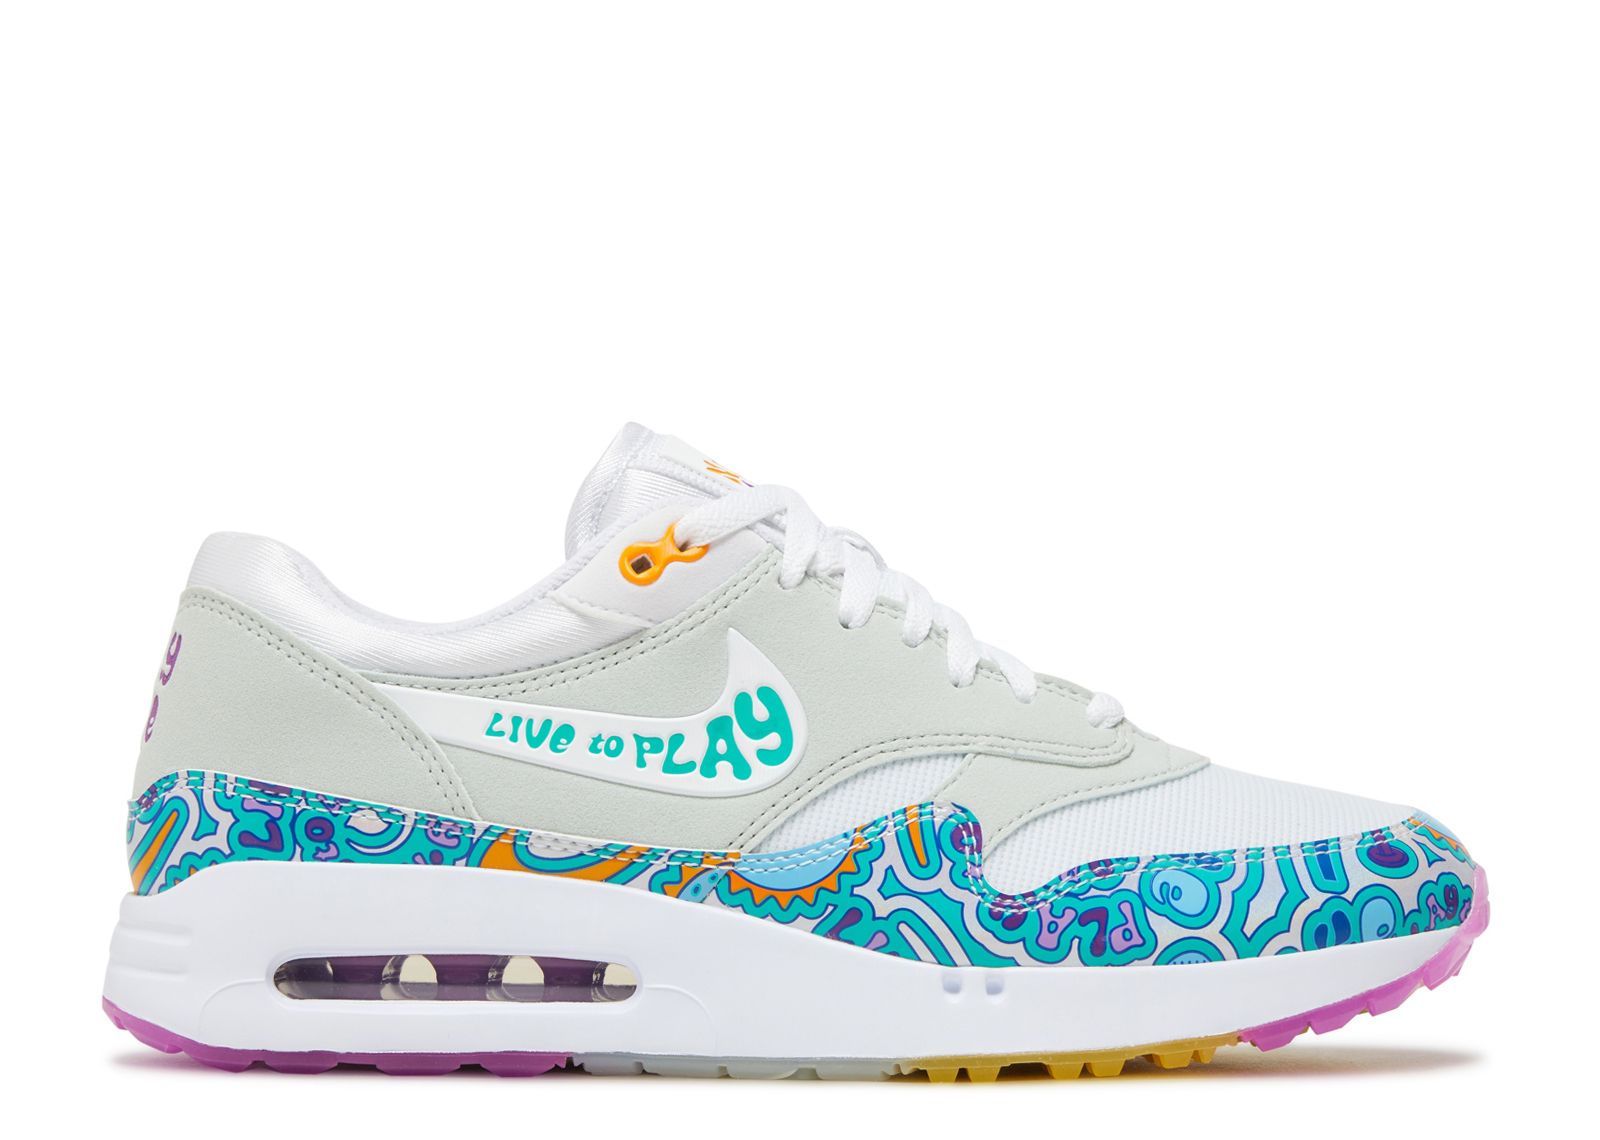 Кроссовки Nike Air Max 1 '86 Og Golf 'Big Bubble - Live To Play, Play To Live', белый